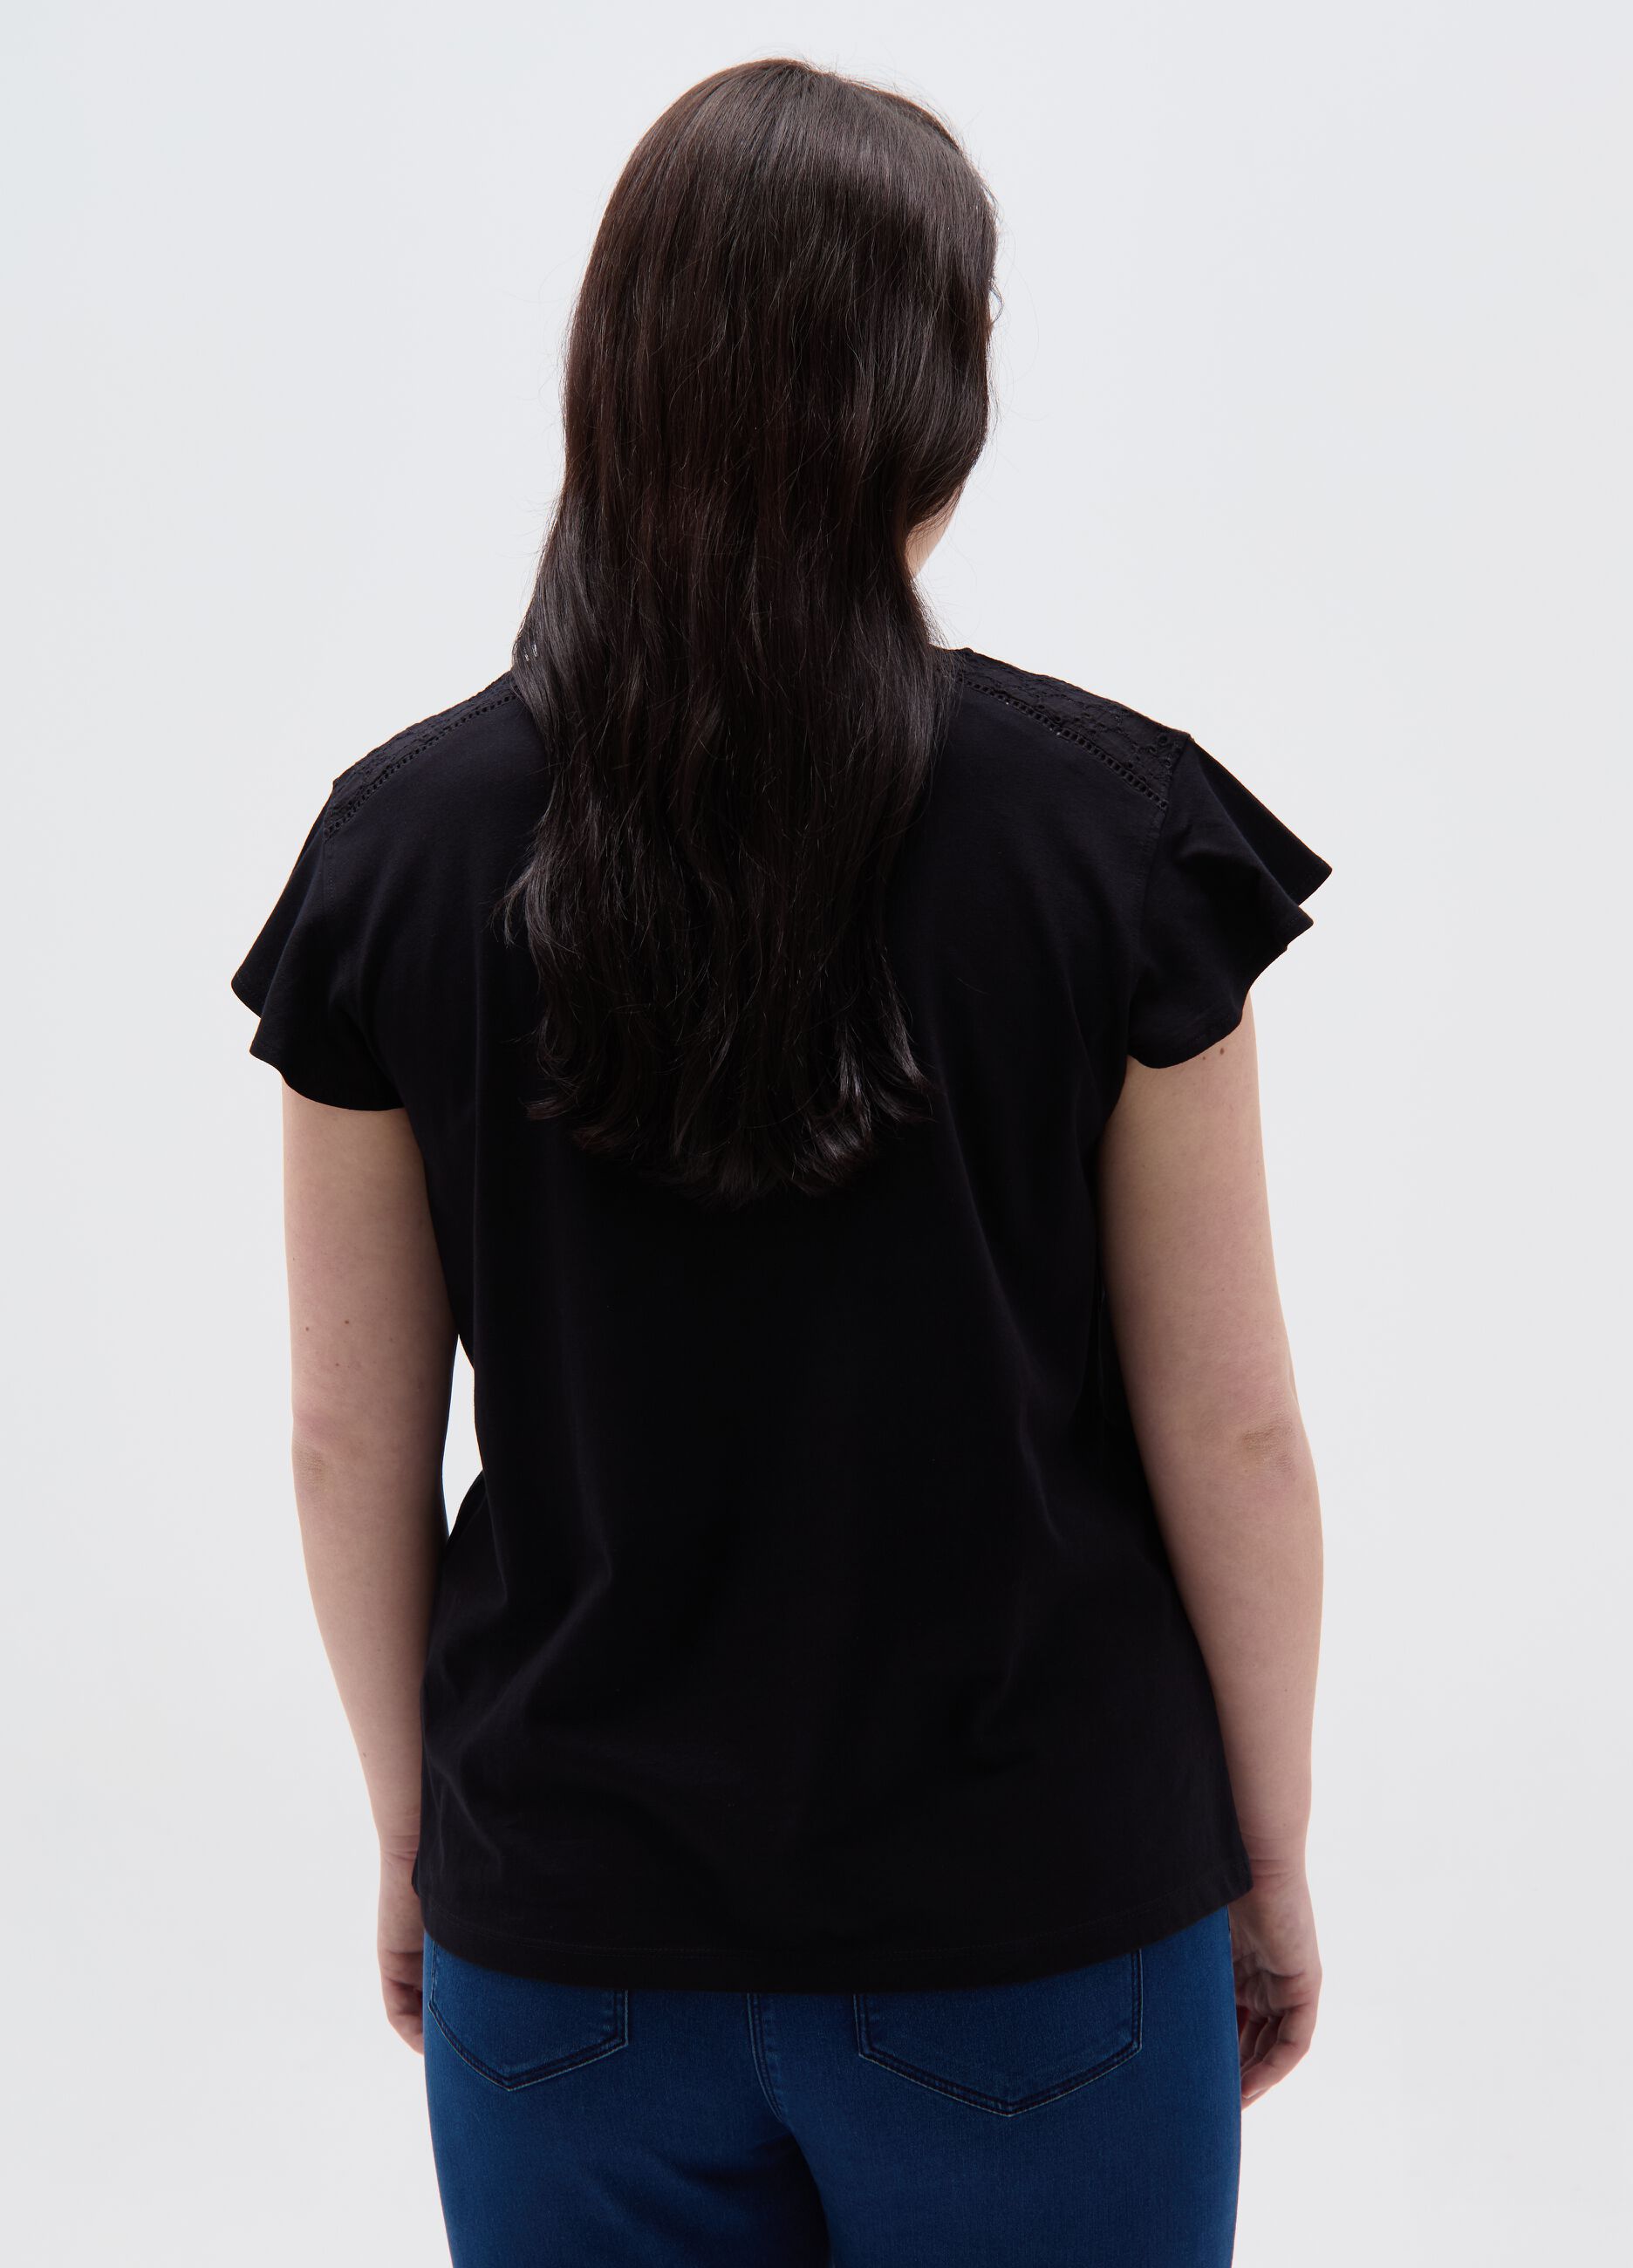 Curvy T-shirt with broderie anglaise insert